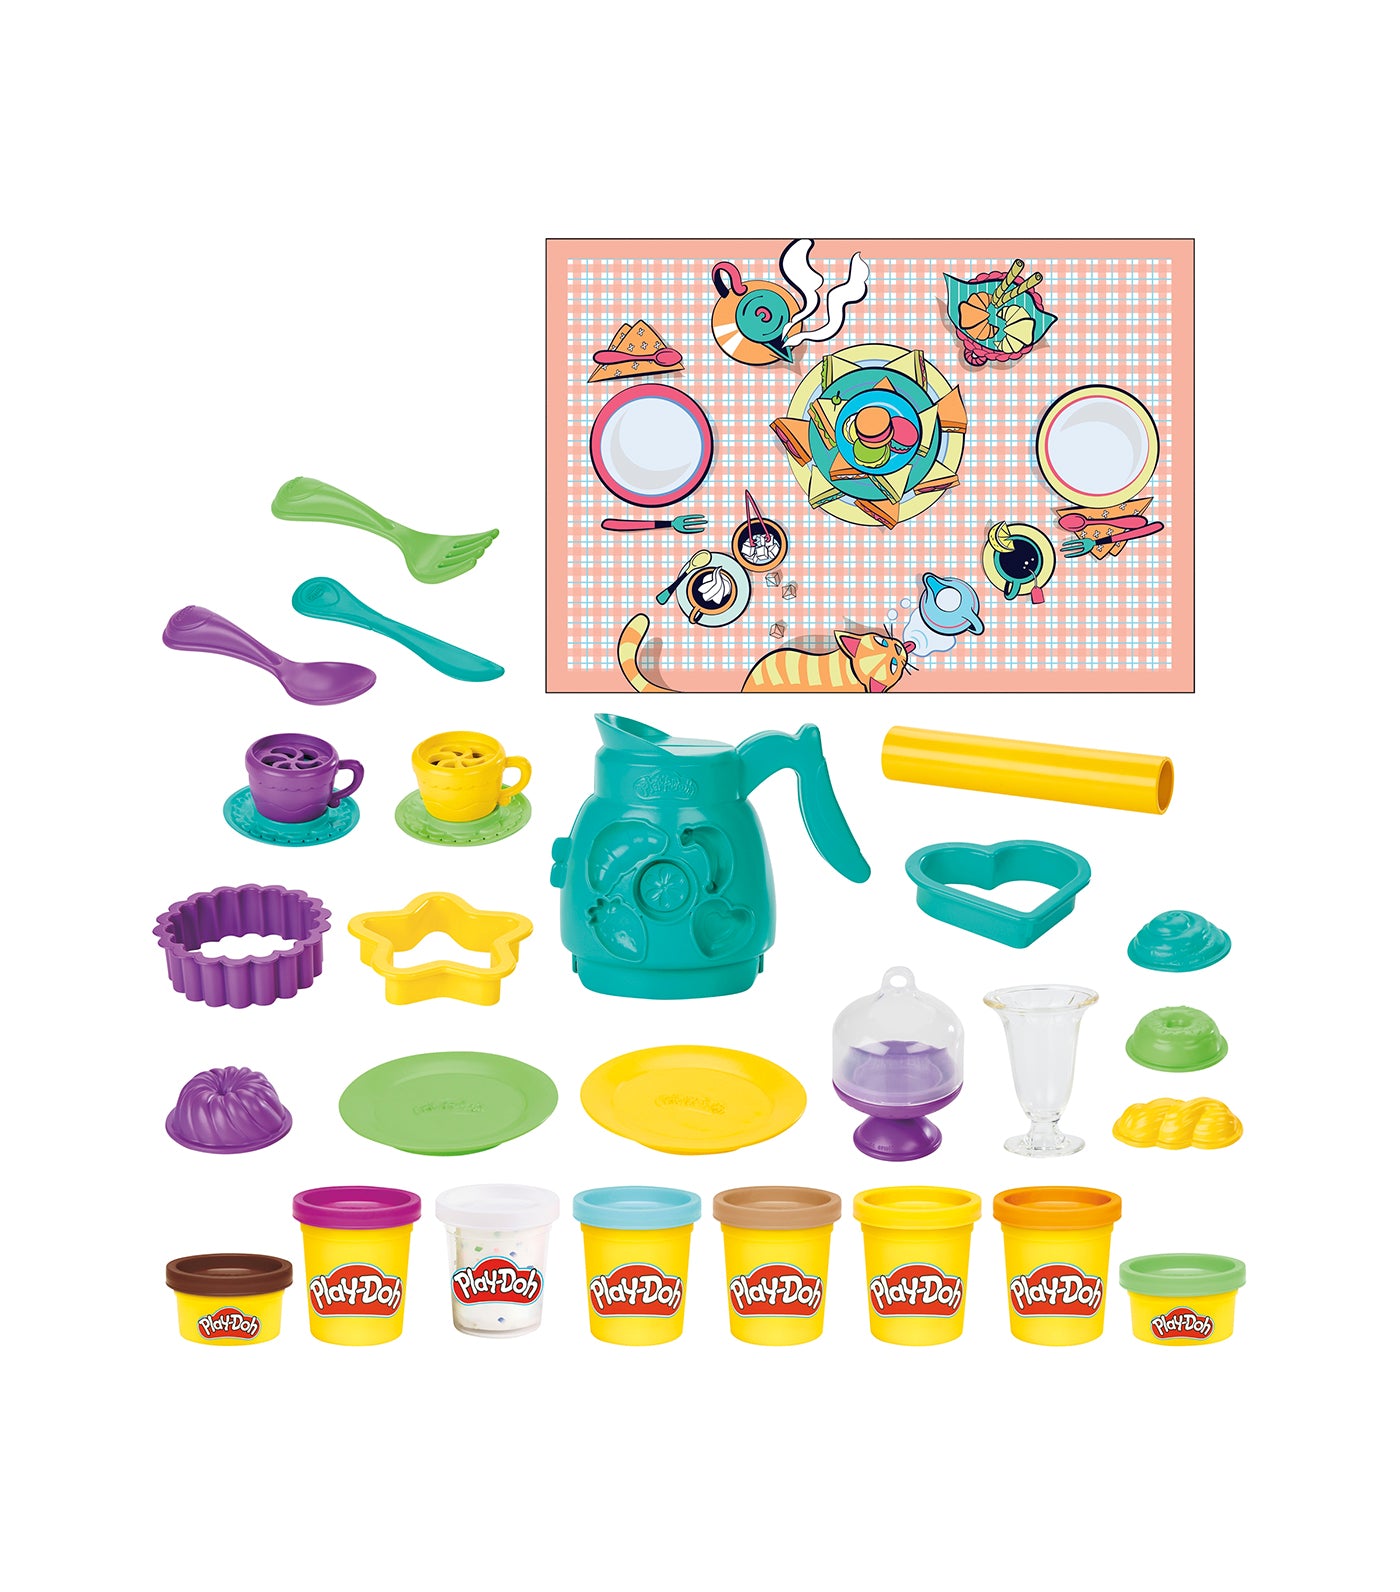 Play-Doh Kitchen Creations Coffee 'n Tea Party Playset